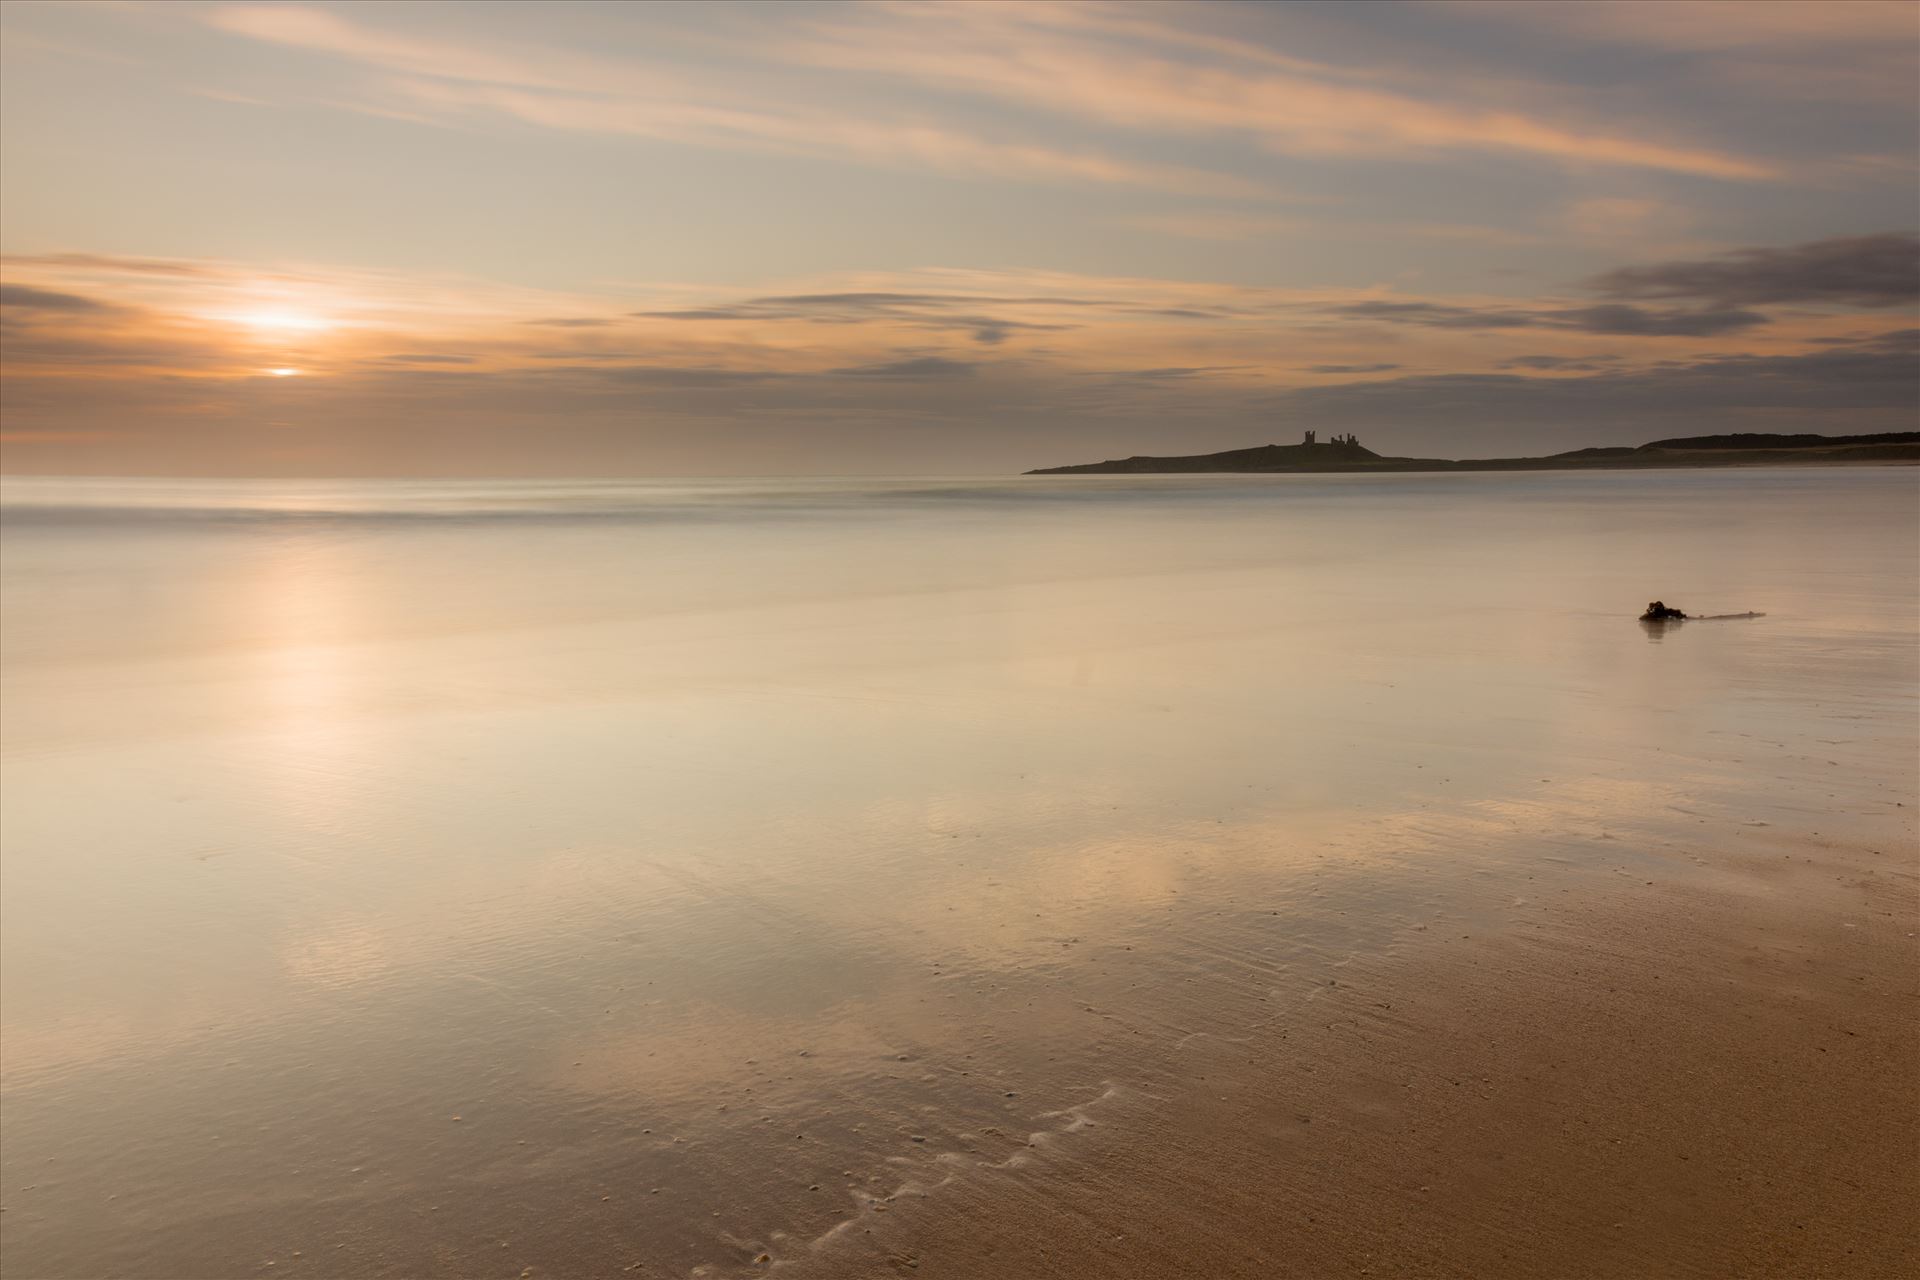 Sunrise at Embleton Bay, Northumberland. (also in black & white) Embleton Bay is a bay on the North Sea, located to the east of the village of Embleton, Northumberland, England. It lies just to the south of Newton-by-the-Sea and north of Craster by philreay